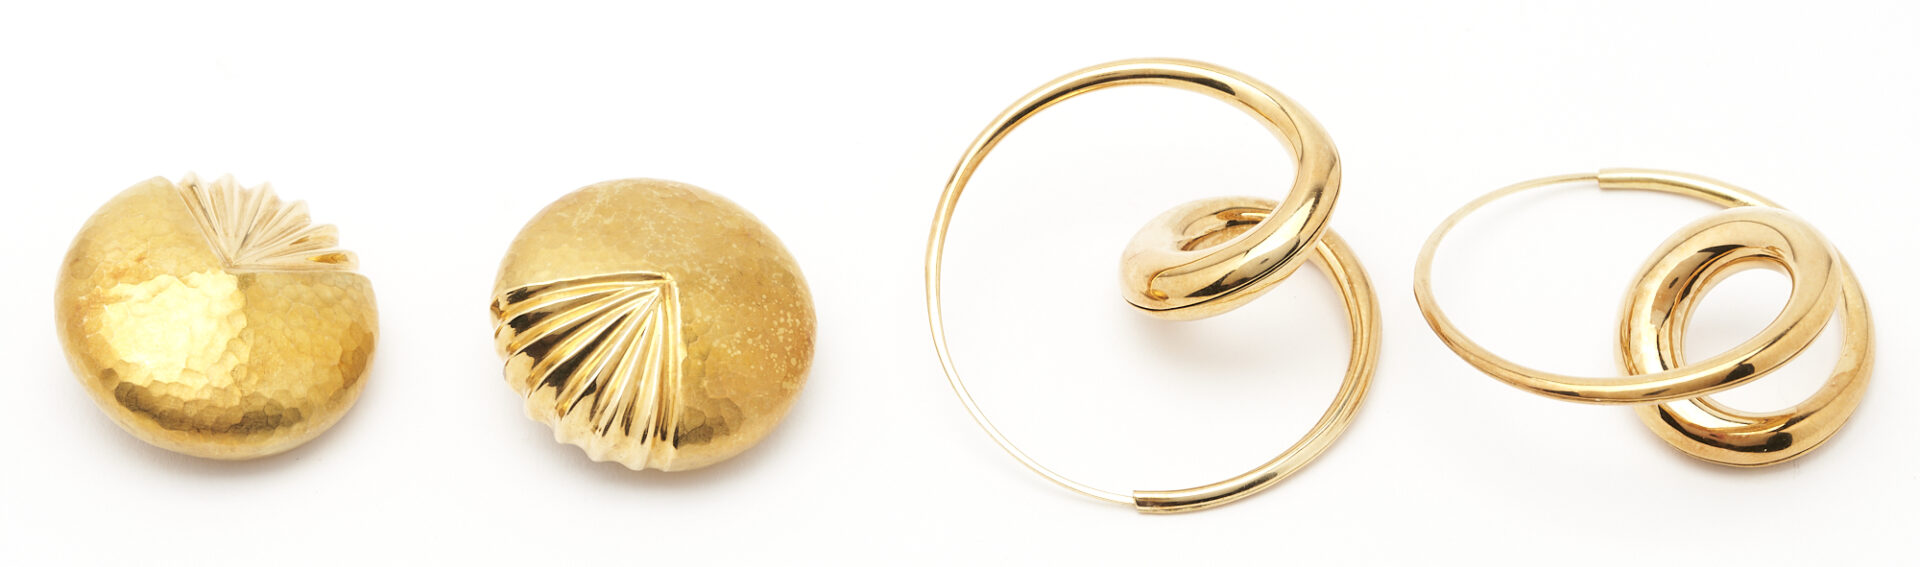 Lot 315: 2 Pairs of 18K Gold Earrings